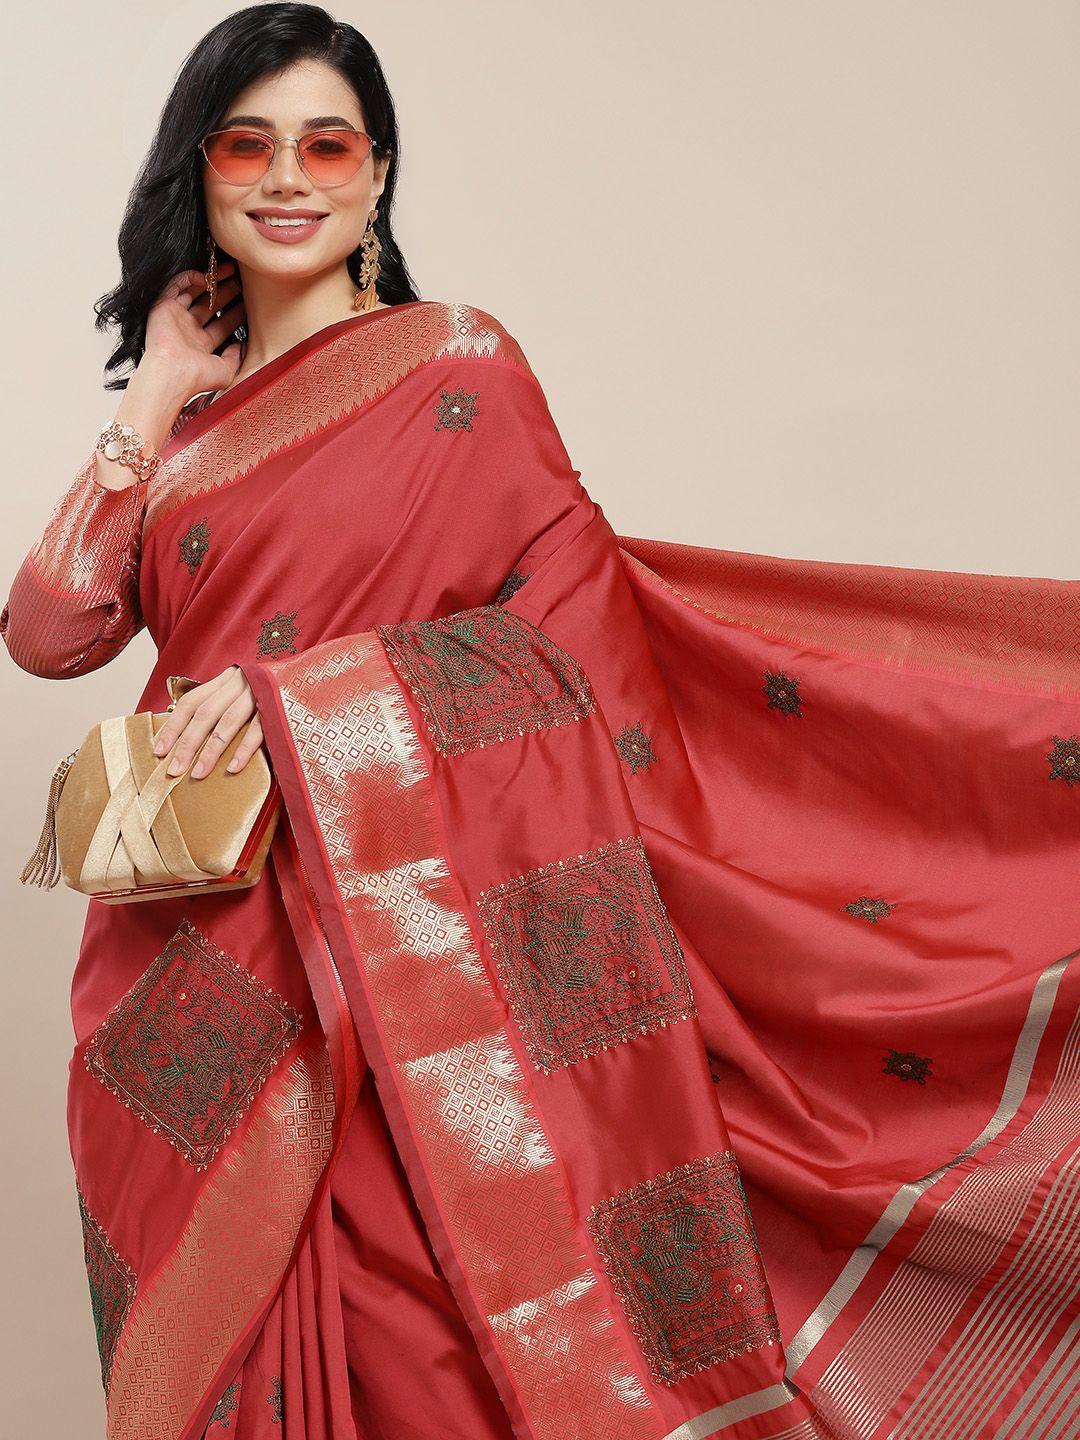 rajgranth red & golden ethnic motifs embroidered saree